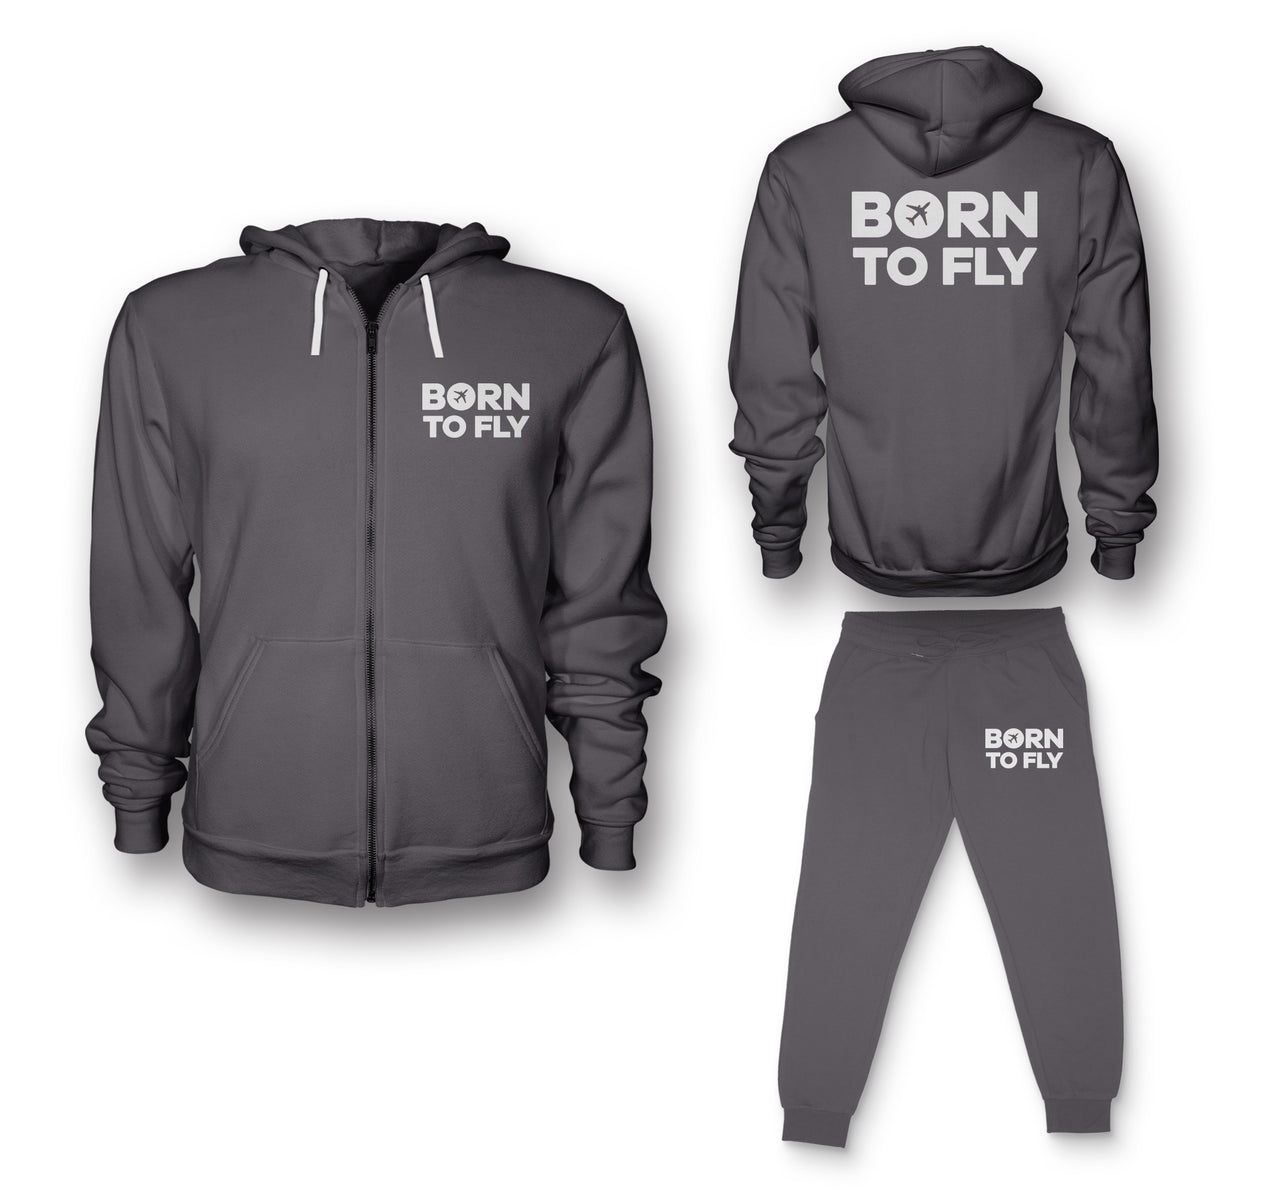 Born To Fly Special Designed Zipped Hoodies & Sweatpants Set